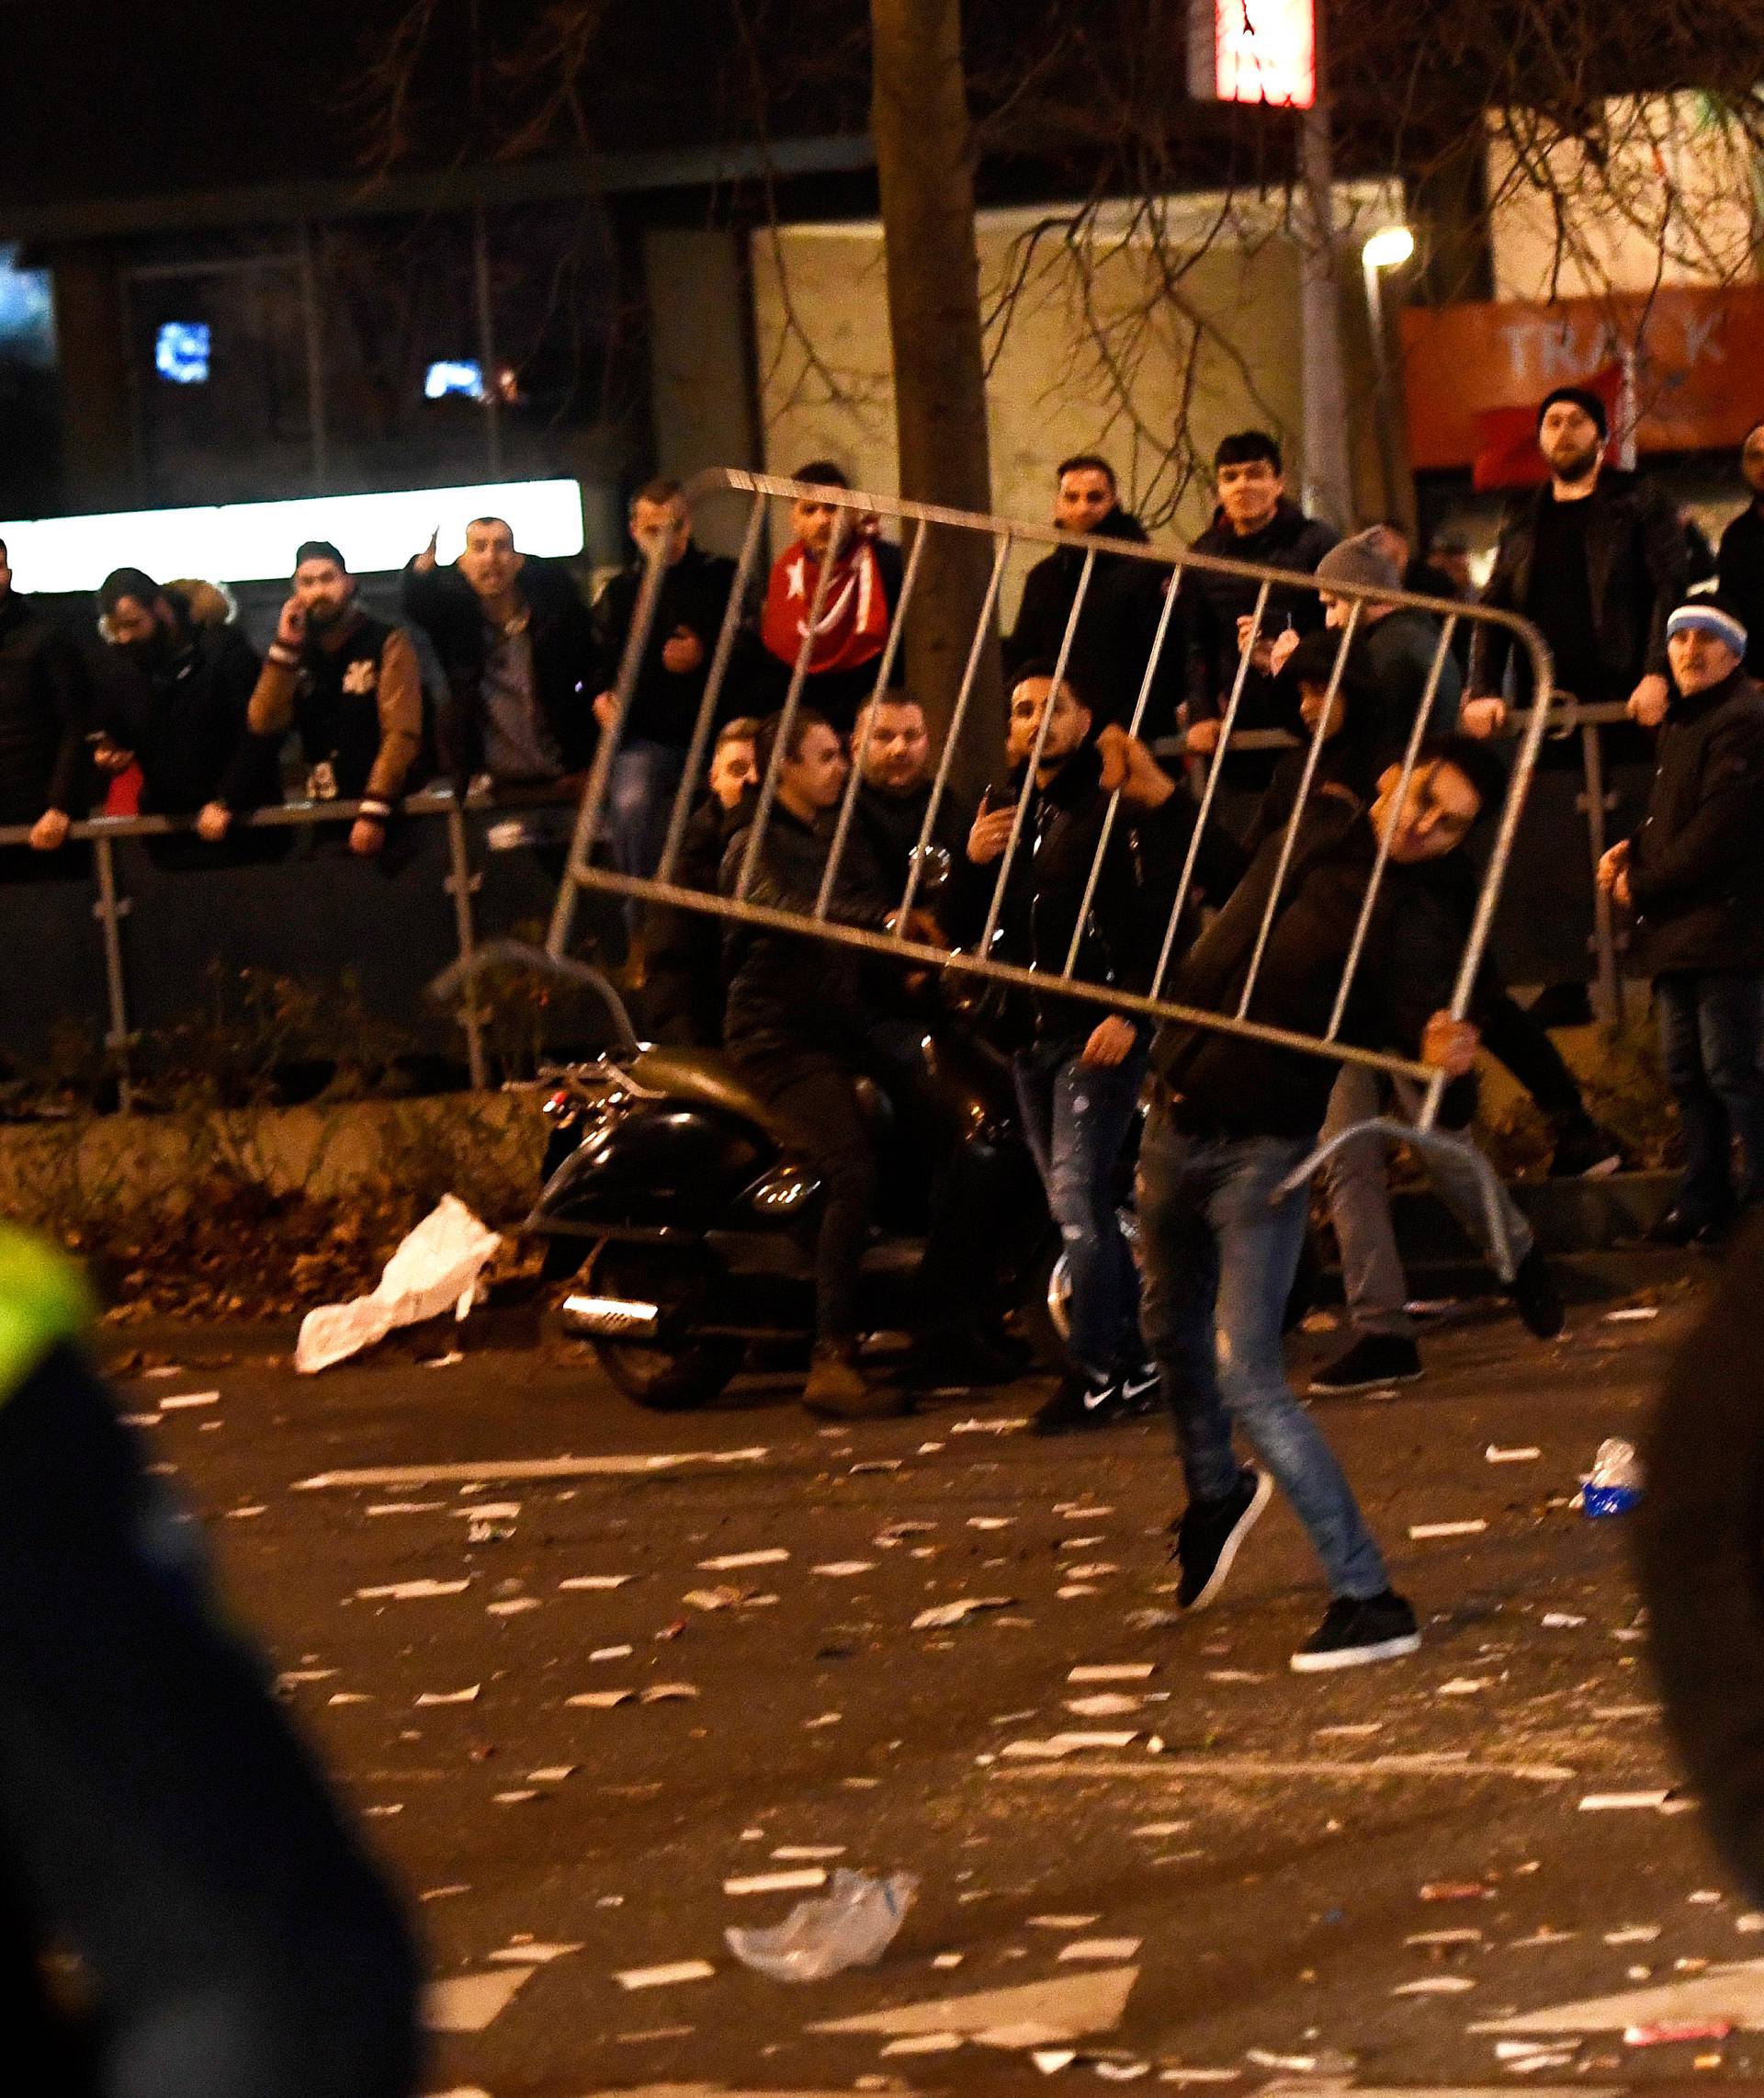 Riot police clash with demonstrators in the streets near the Turkish consulate in Rotterdam